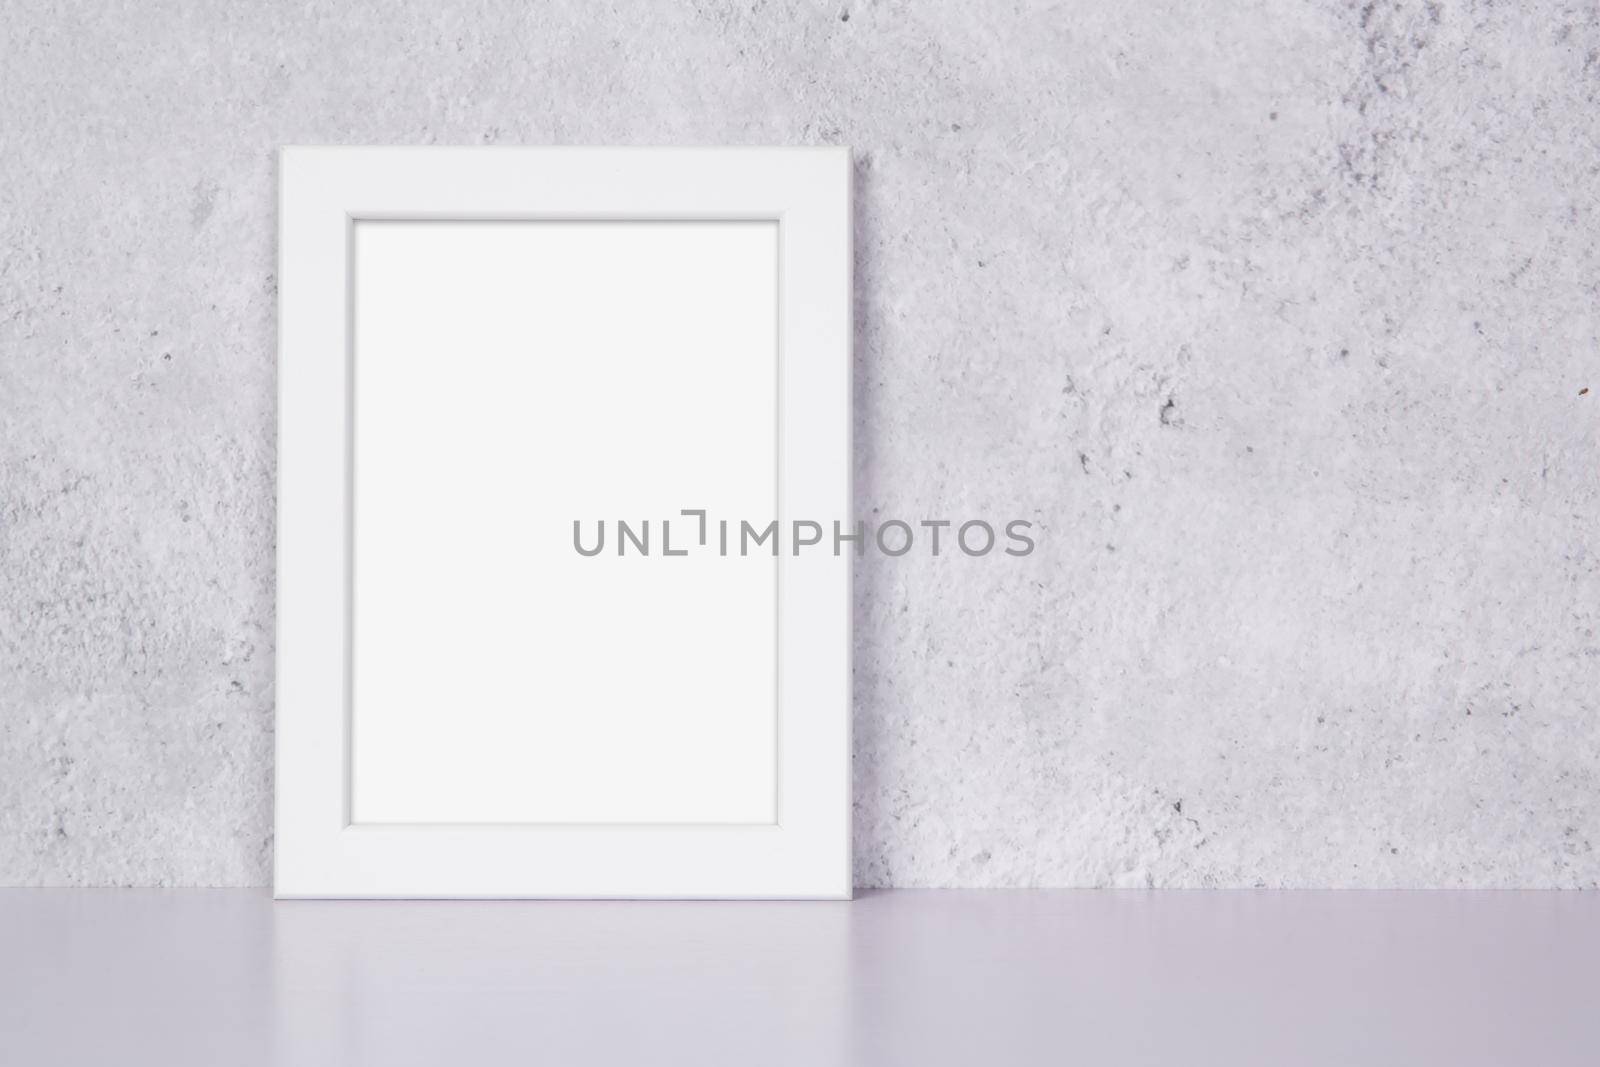 Mockup white frame vertical on table top and wall at home, mock up poster for presentation on desk, your design for gallery photo and picture image, border template and decoration for advertising.